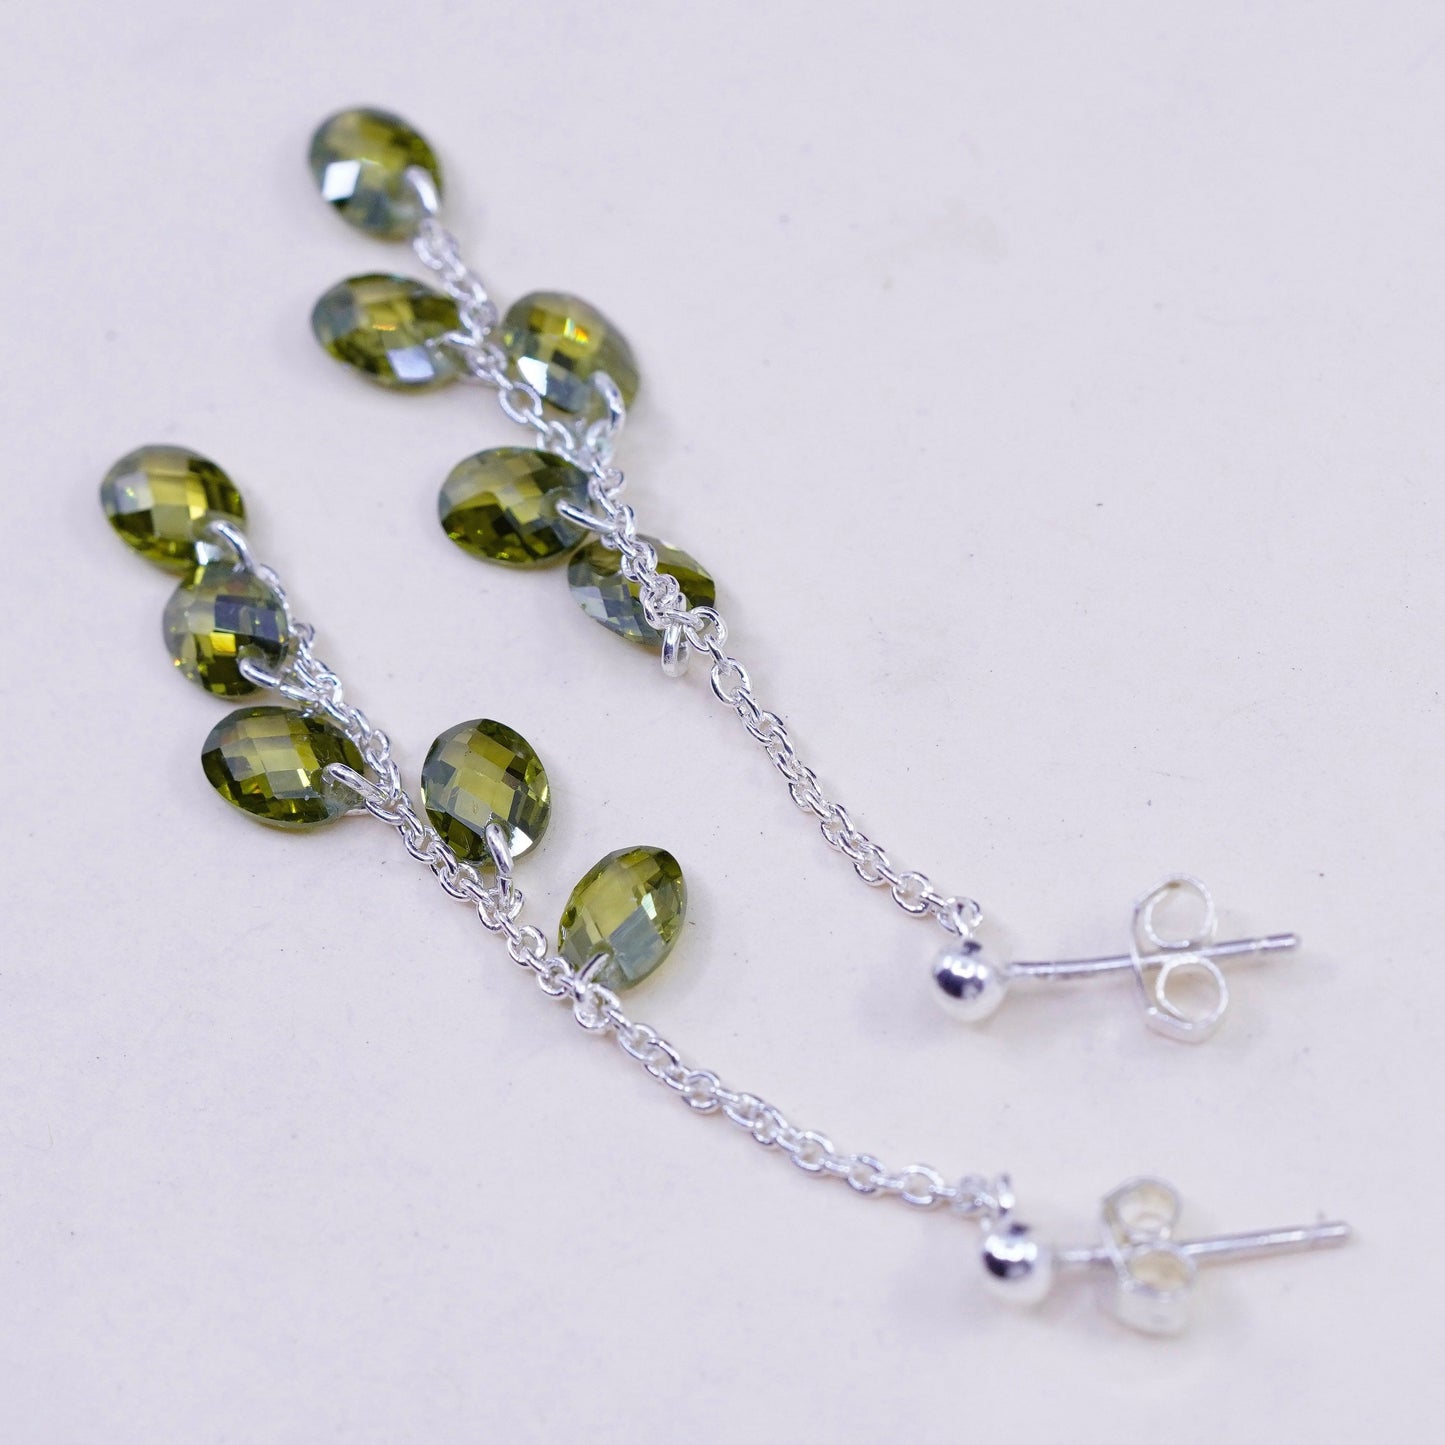 Vintage sterling 925 silver handmade earrings with cluster olive green crystal